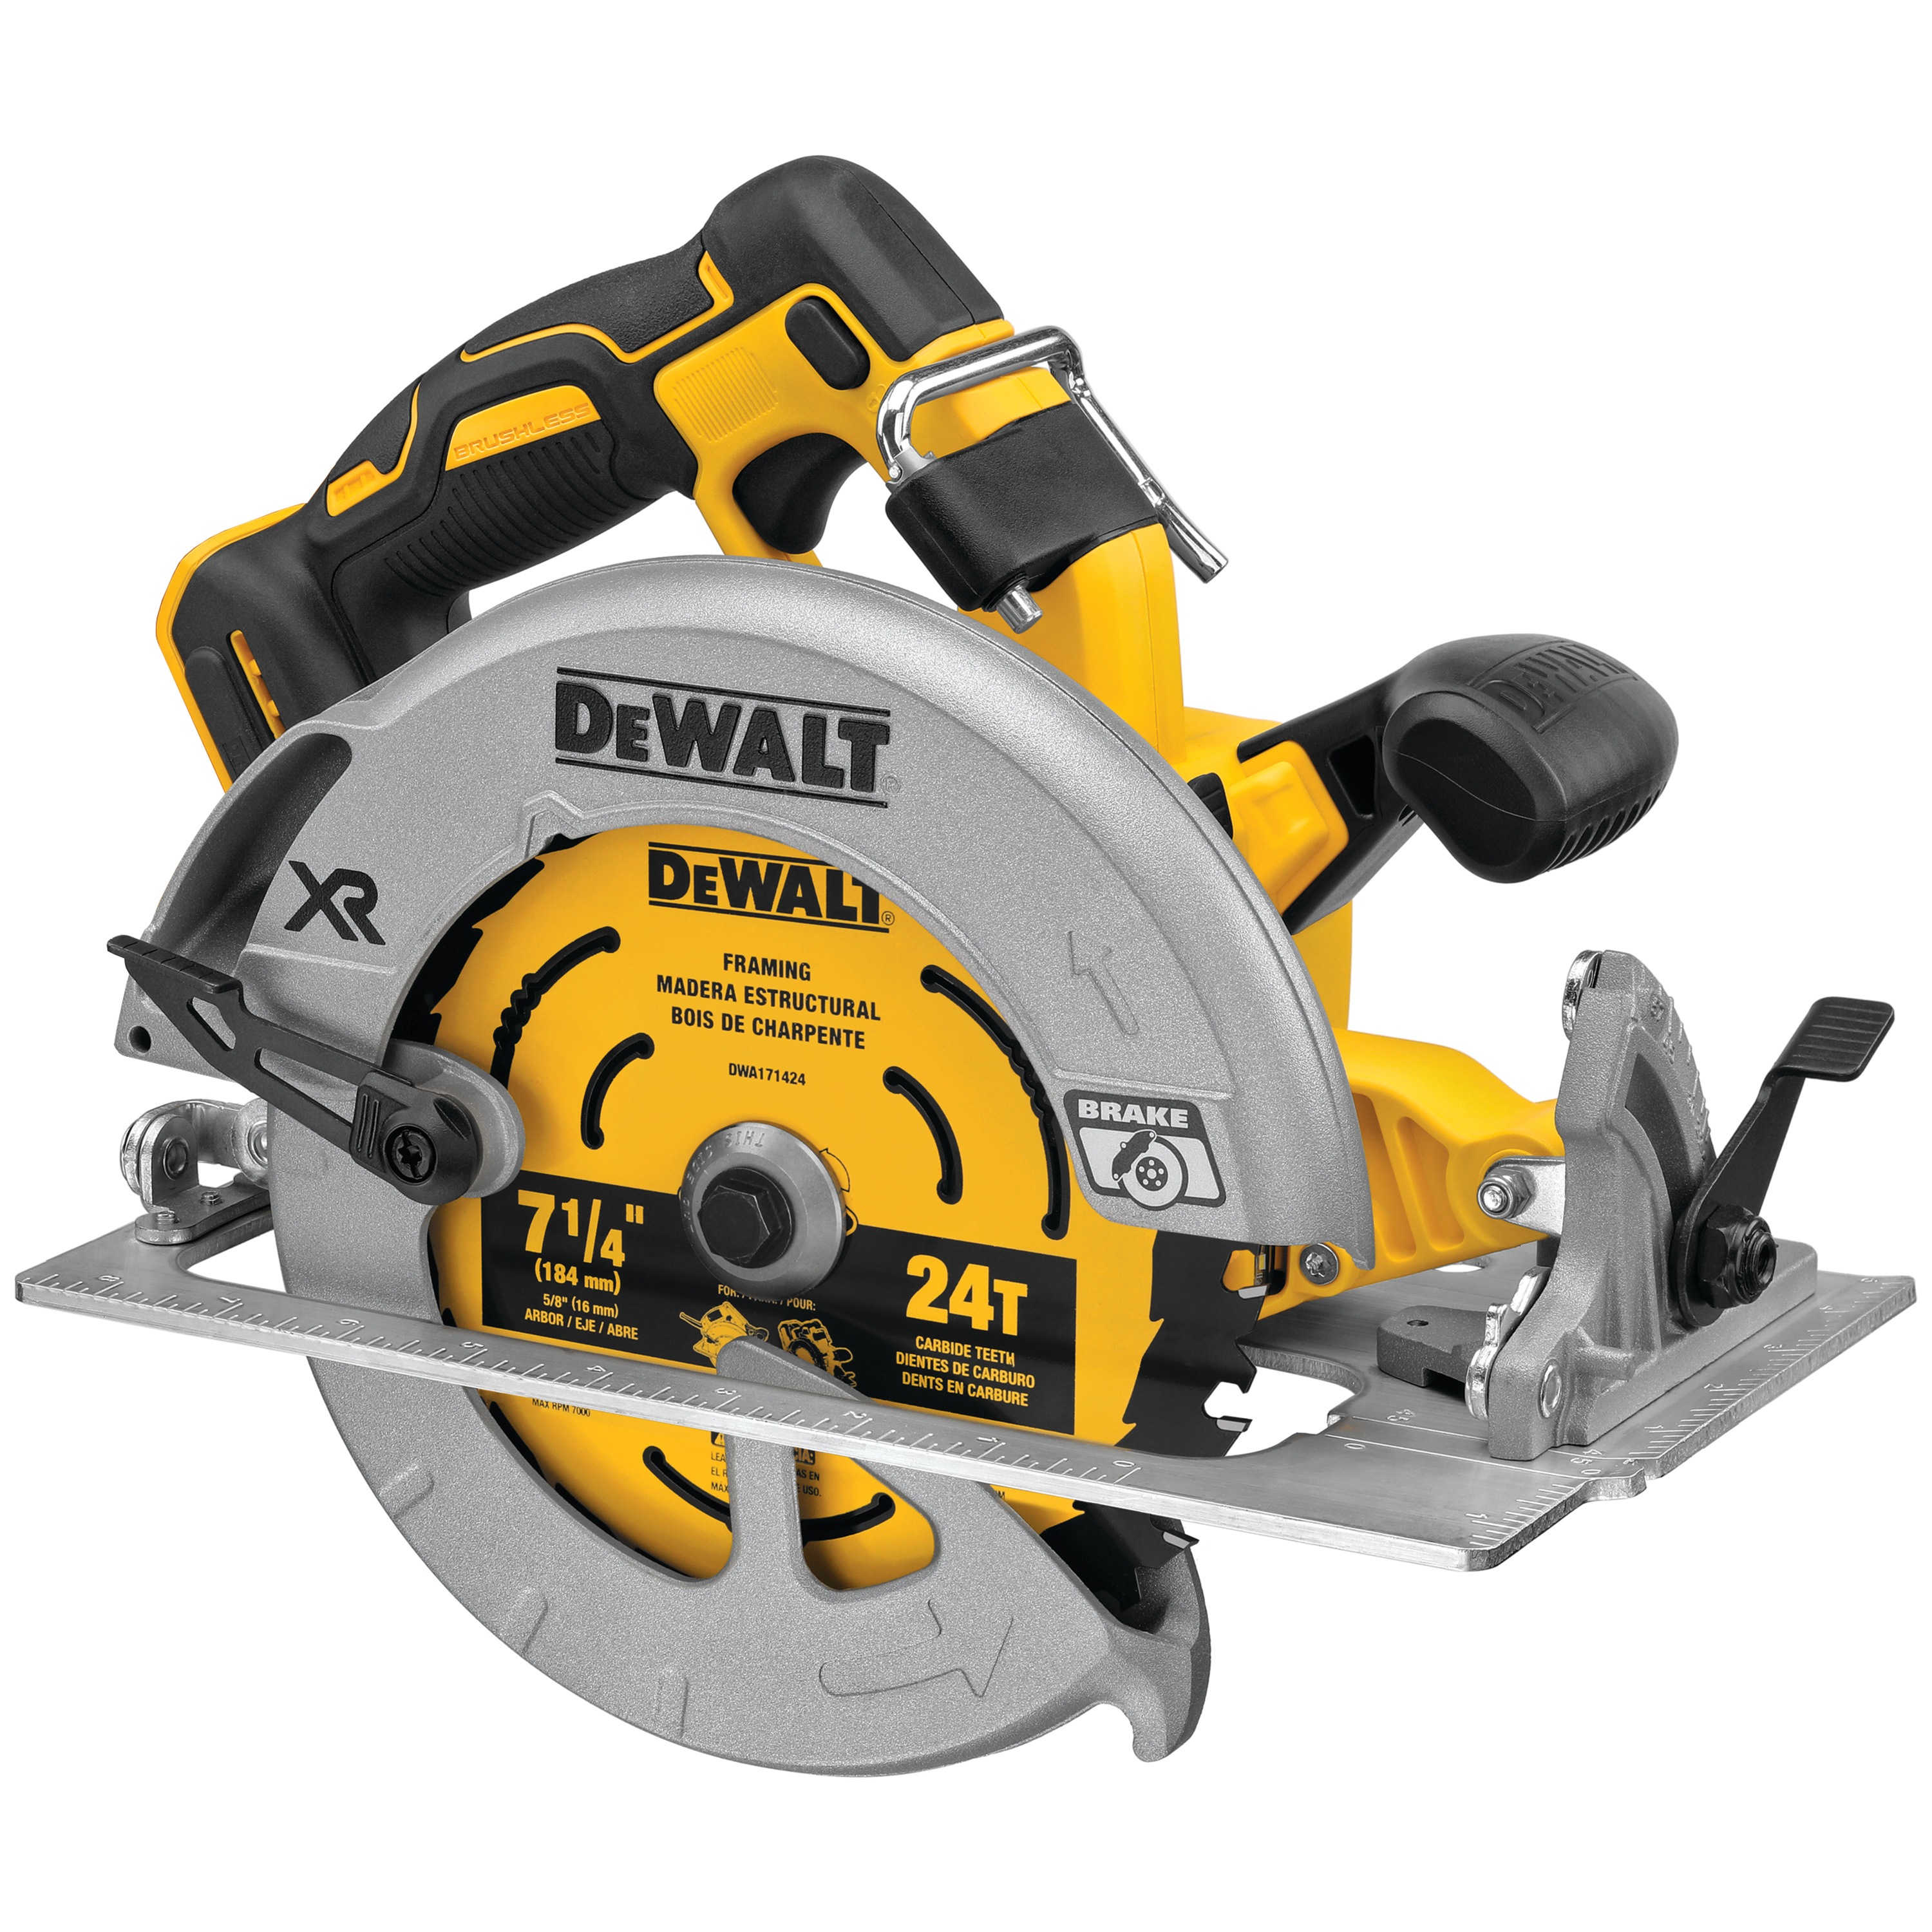 Profile of 20 volt brushless circular saw combo kit with power detect tool technology.